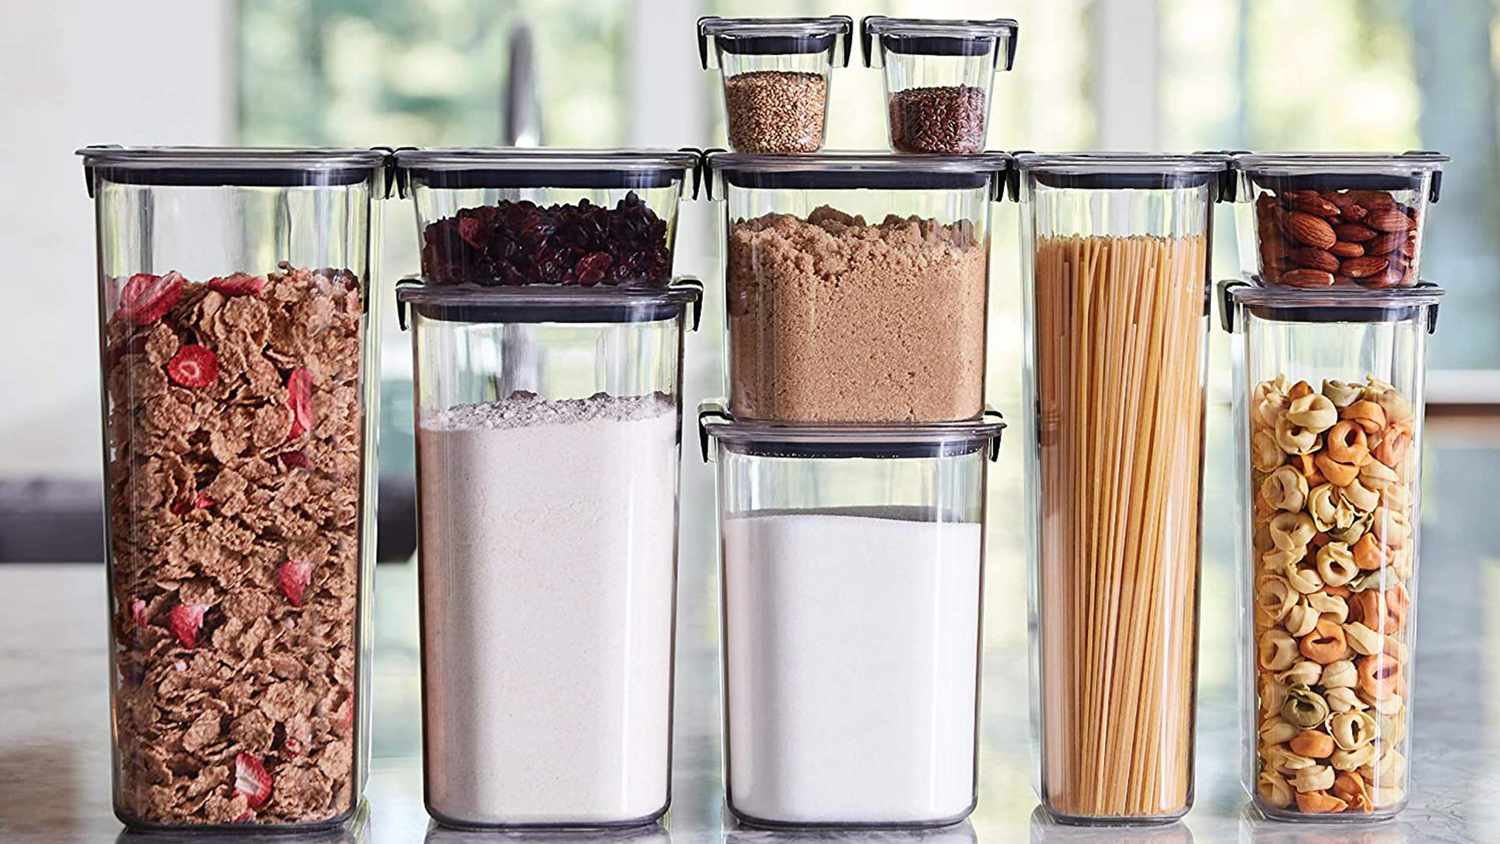 Rubbermaid Brilliance Pantry Organization & Food Storage Containers